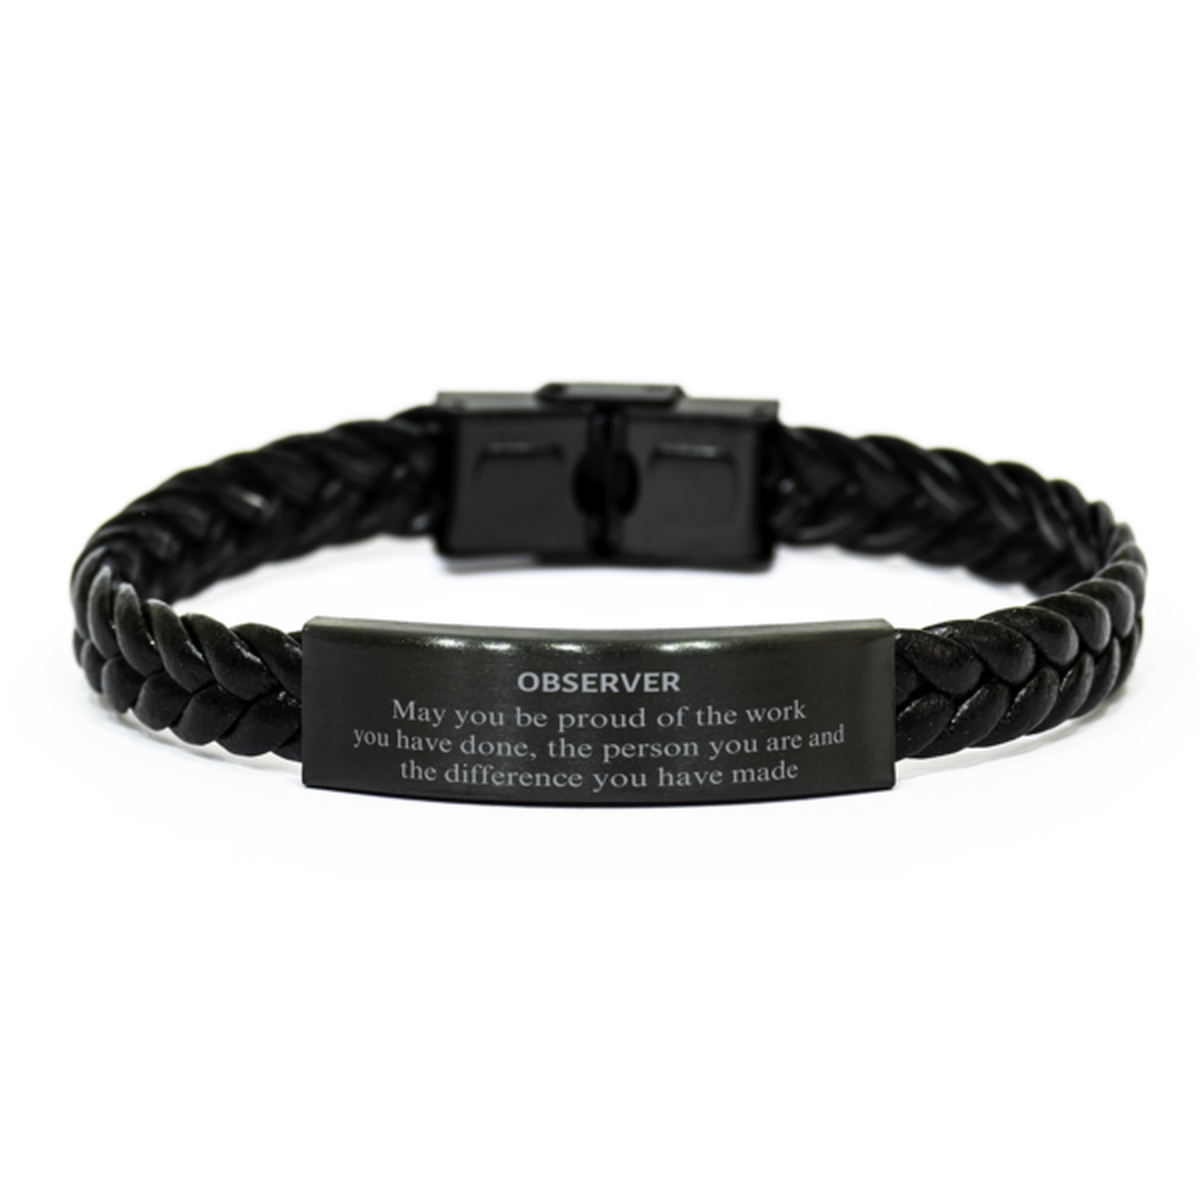 Observer May you be proud of the work you have done, Retirement Observer Braided Leather Bracelet for Colleague Appreciation Gifts Amazing for Observer